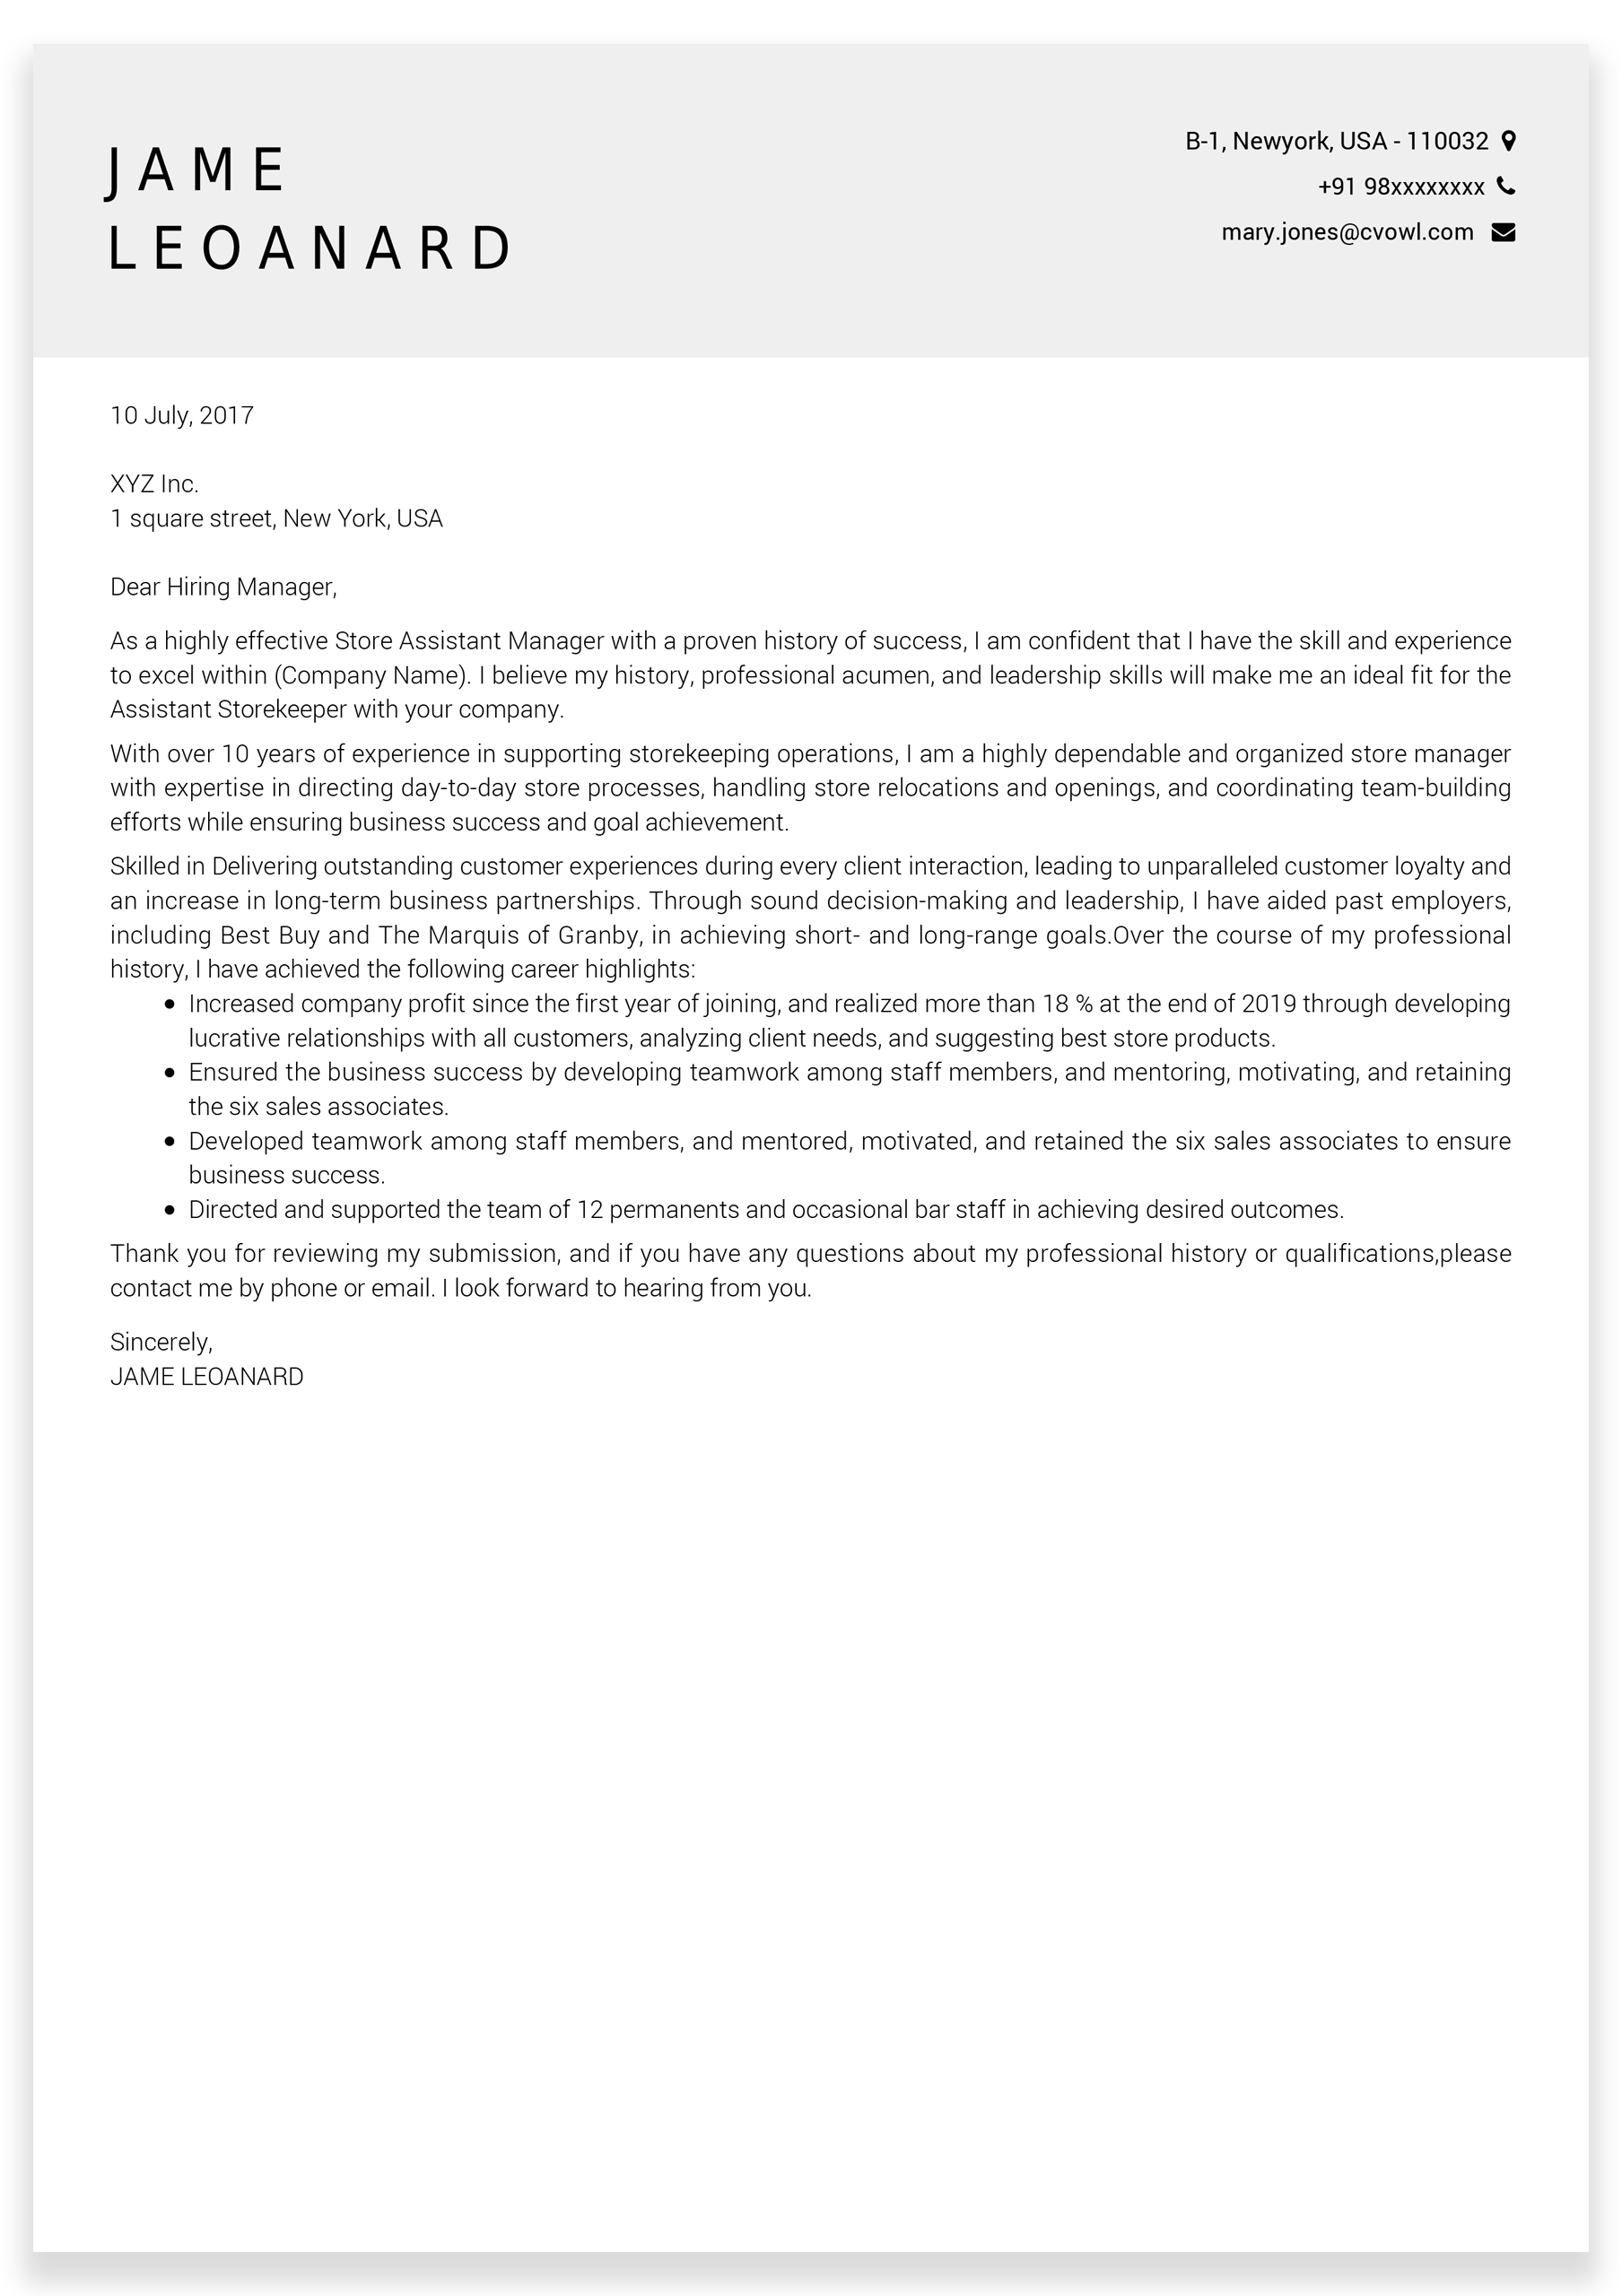 Teaching-Assistant-Cover-Letter-sample4